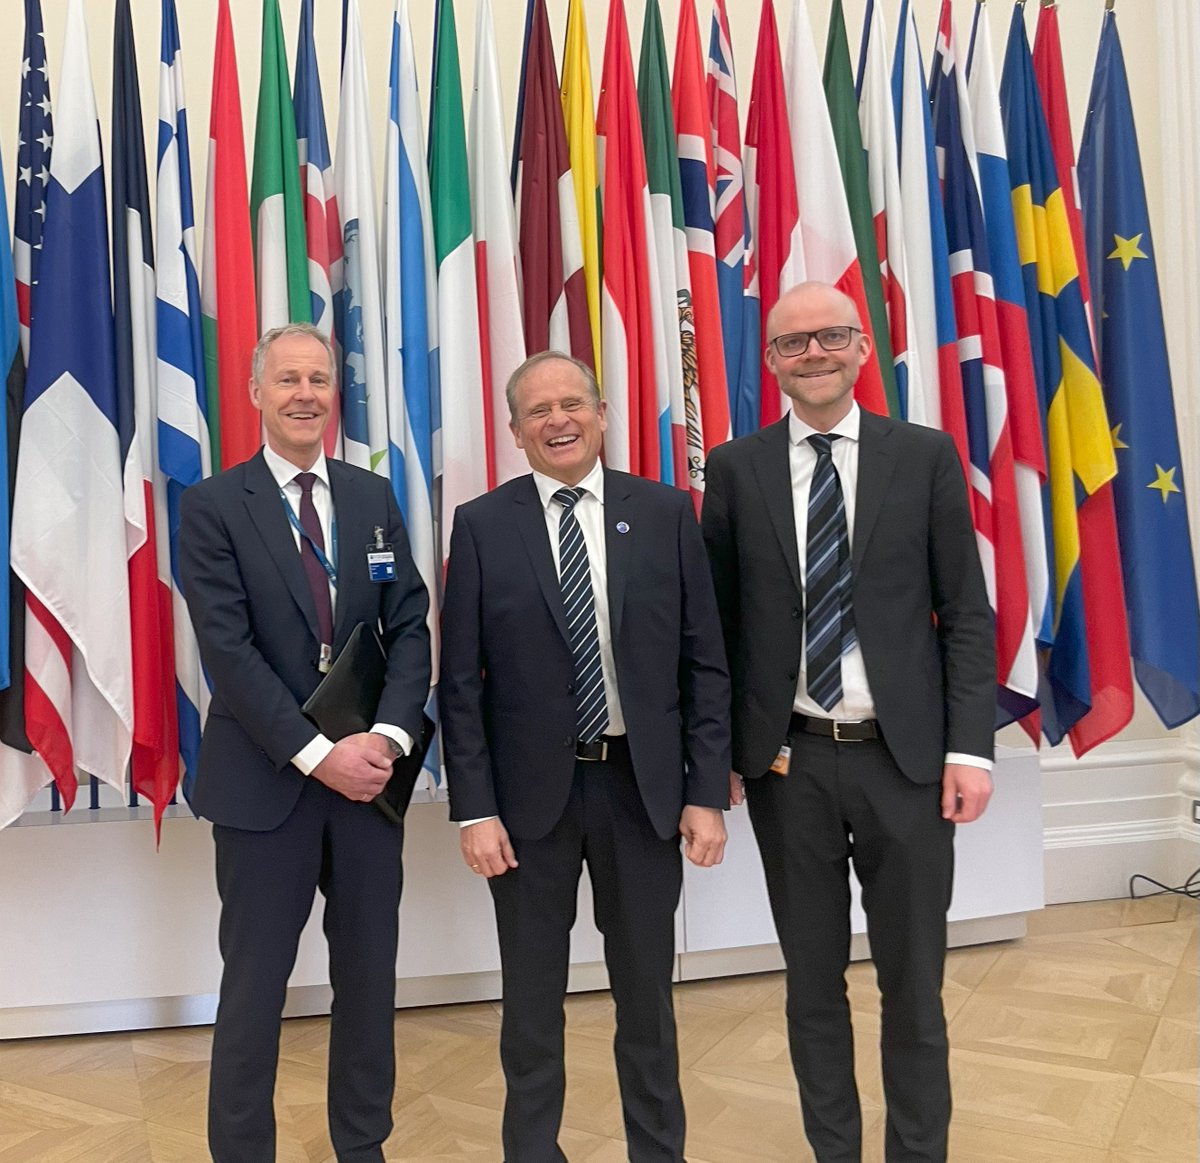 Today we kick off the #OECDMinisterial, where ministers and high-level representatives will discuss issues critical to the international community and set out the organization’s strategic orientations. Great to have @akravik79 and @erlendgrimstad in Paris to represent Norway 🇳🇴